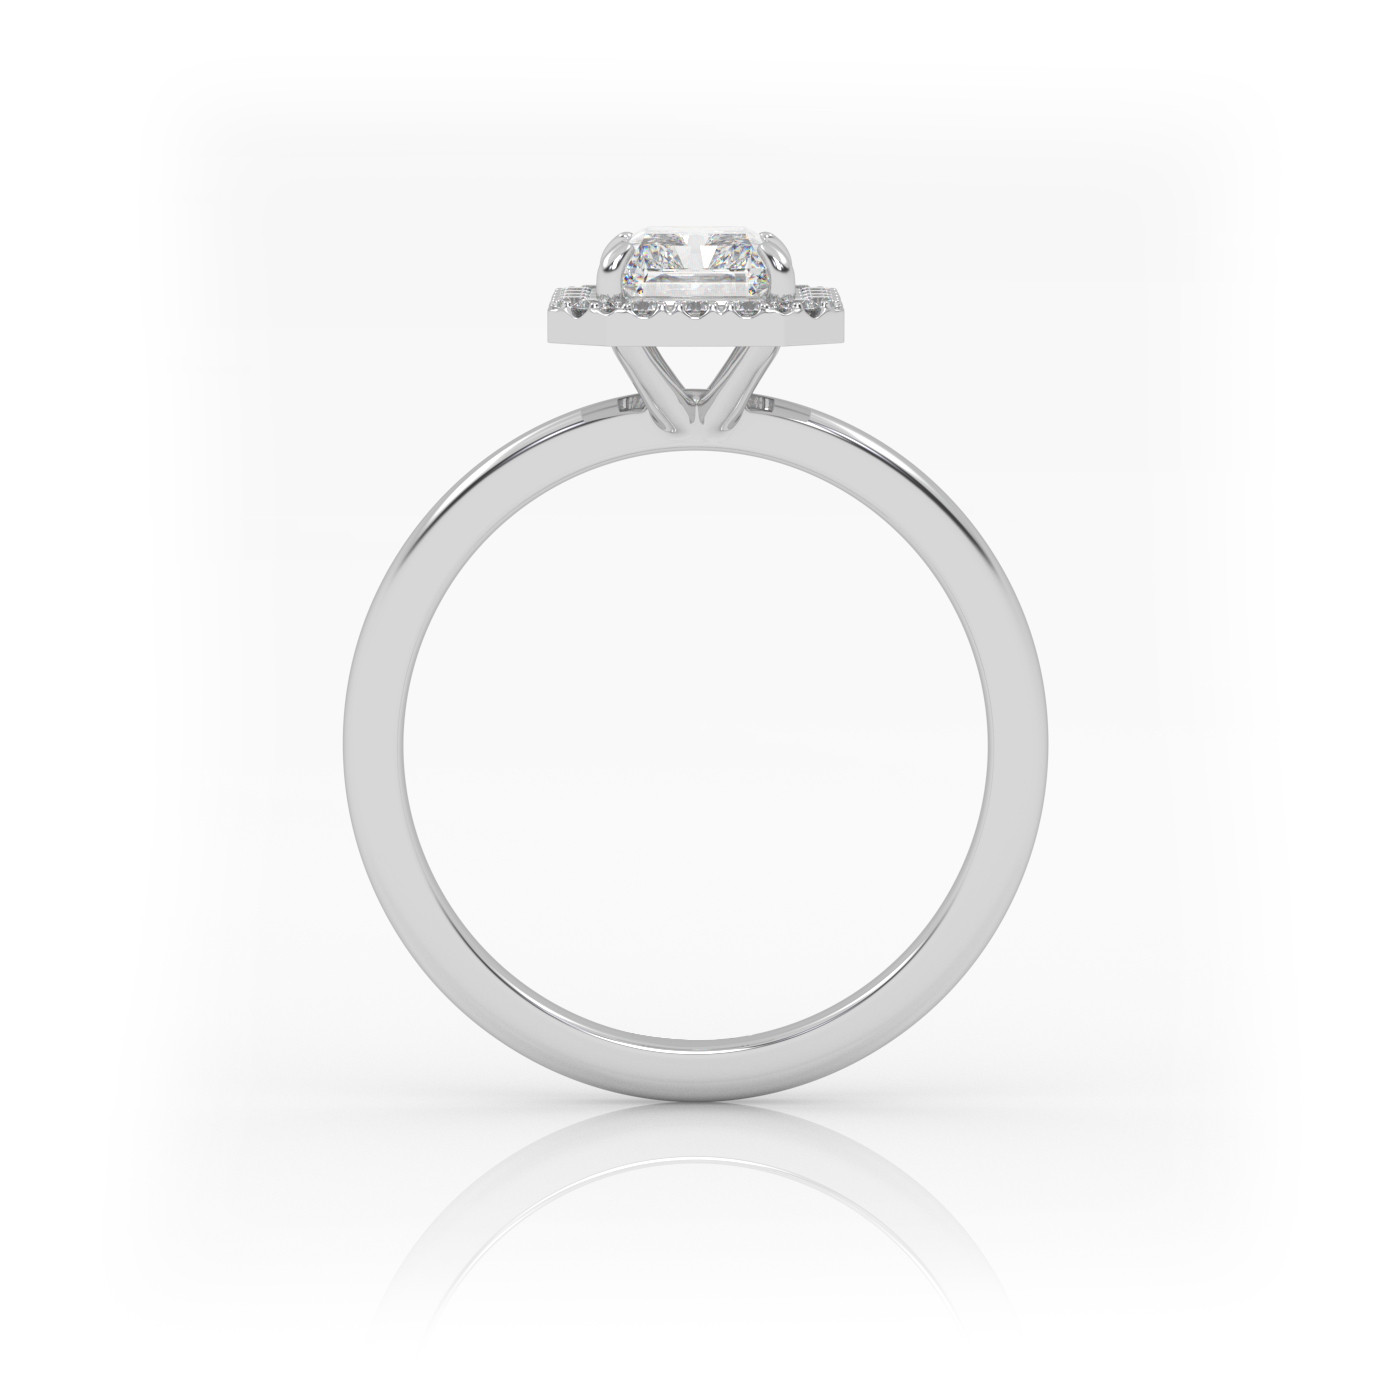 18K WHITE GOLD Radiant Diamond Cut Engagement Ring with Halo Style